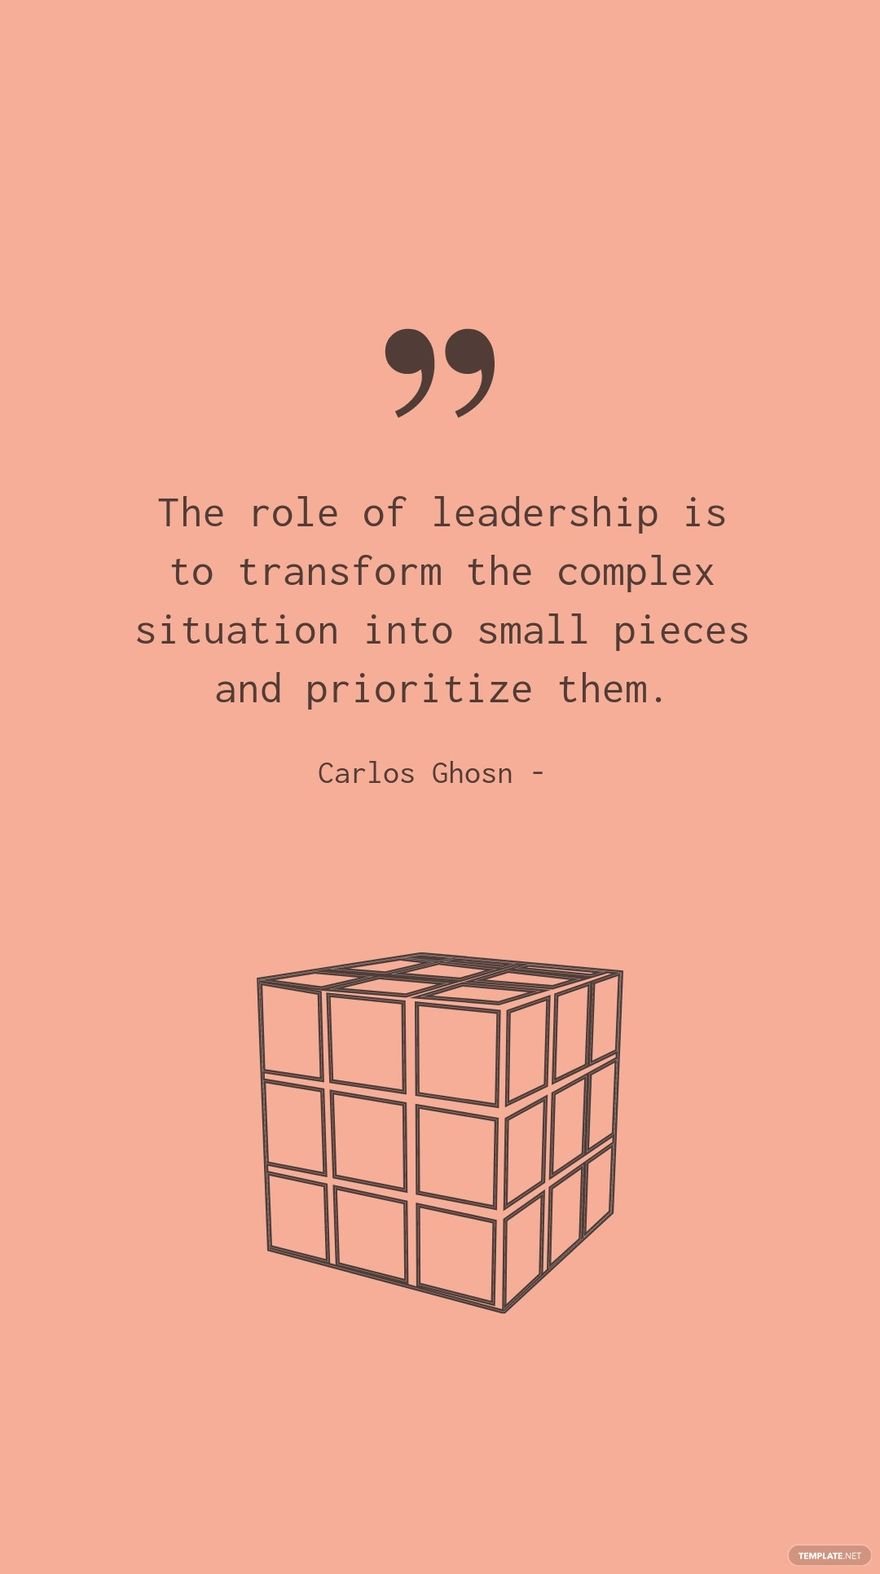 Carlos Ghosn - The role of leadership is to transform the complex situation into small pieces and prioritize them.